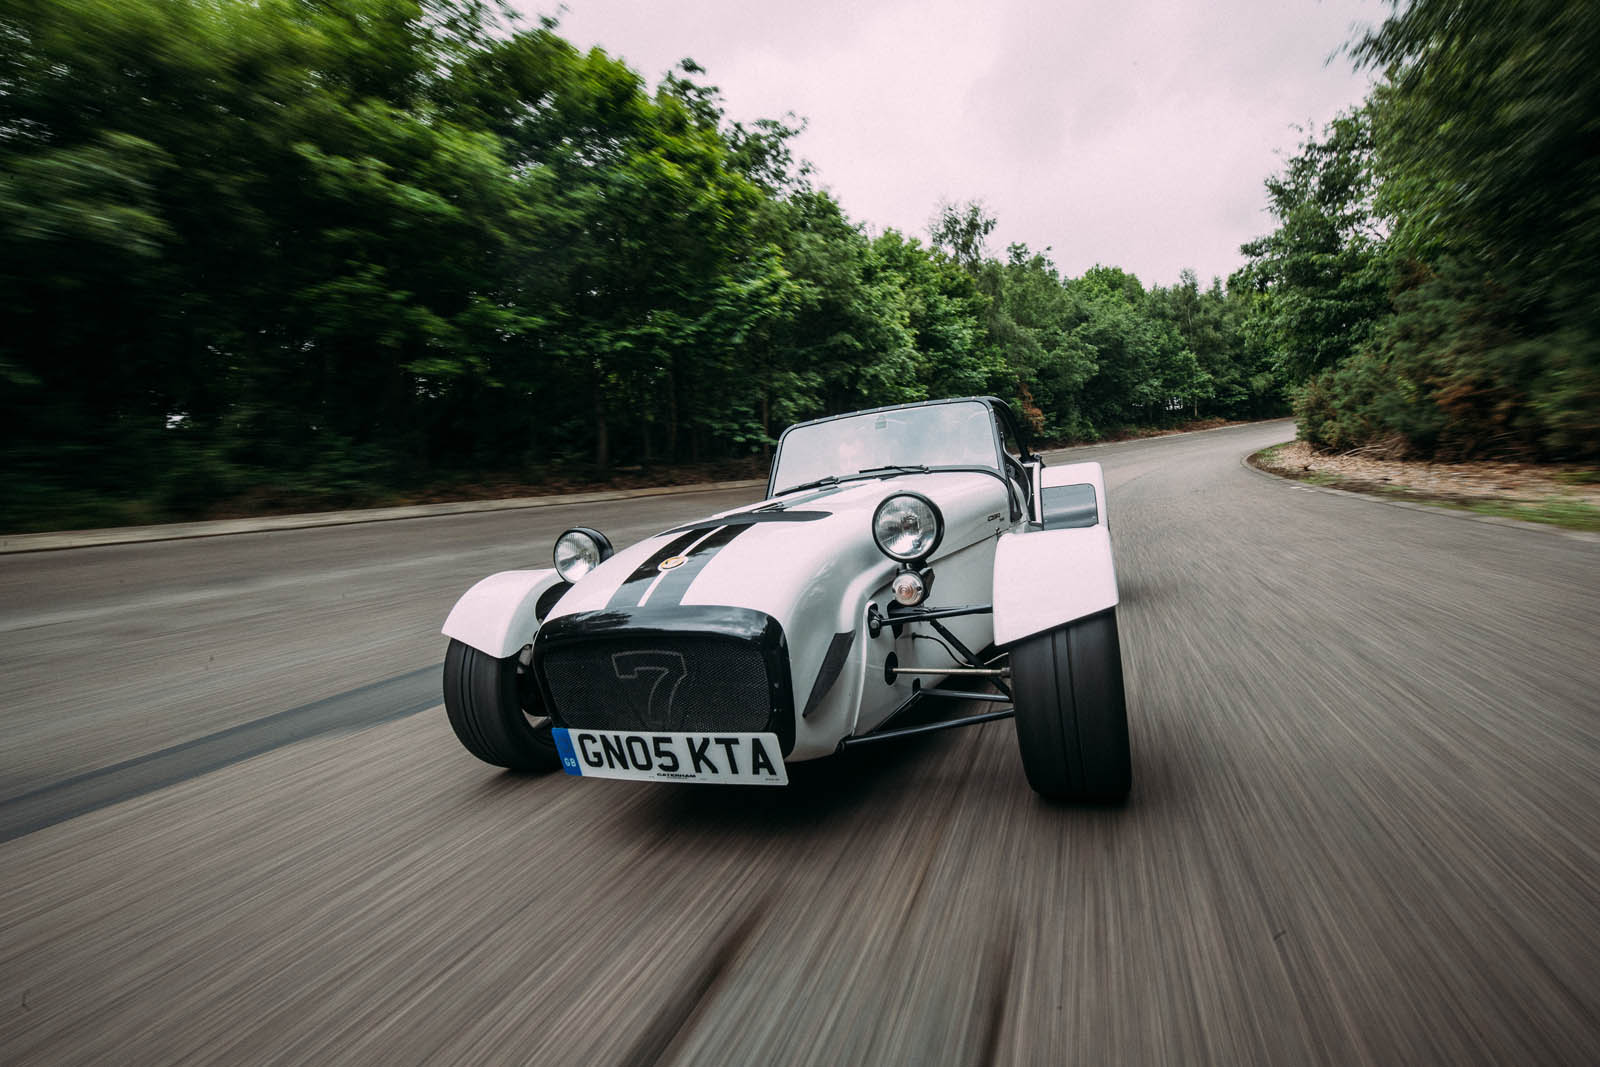 Historic Caterham Photoshoot.Longcross Test Track31st May 2017Images copyright Malcolm Griffiths07768 230706www.malcolm.gb.net